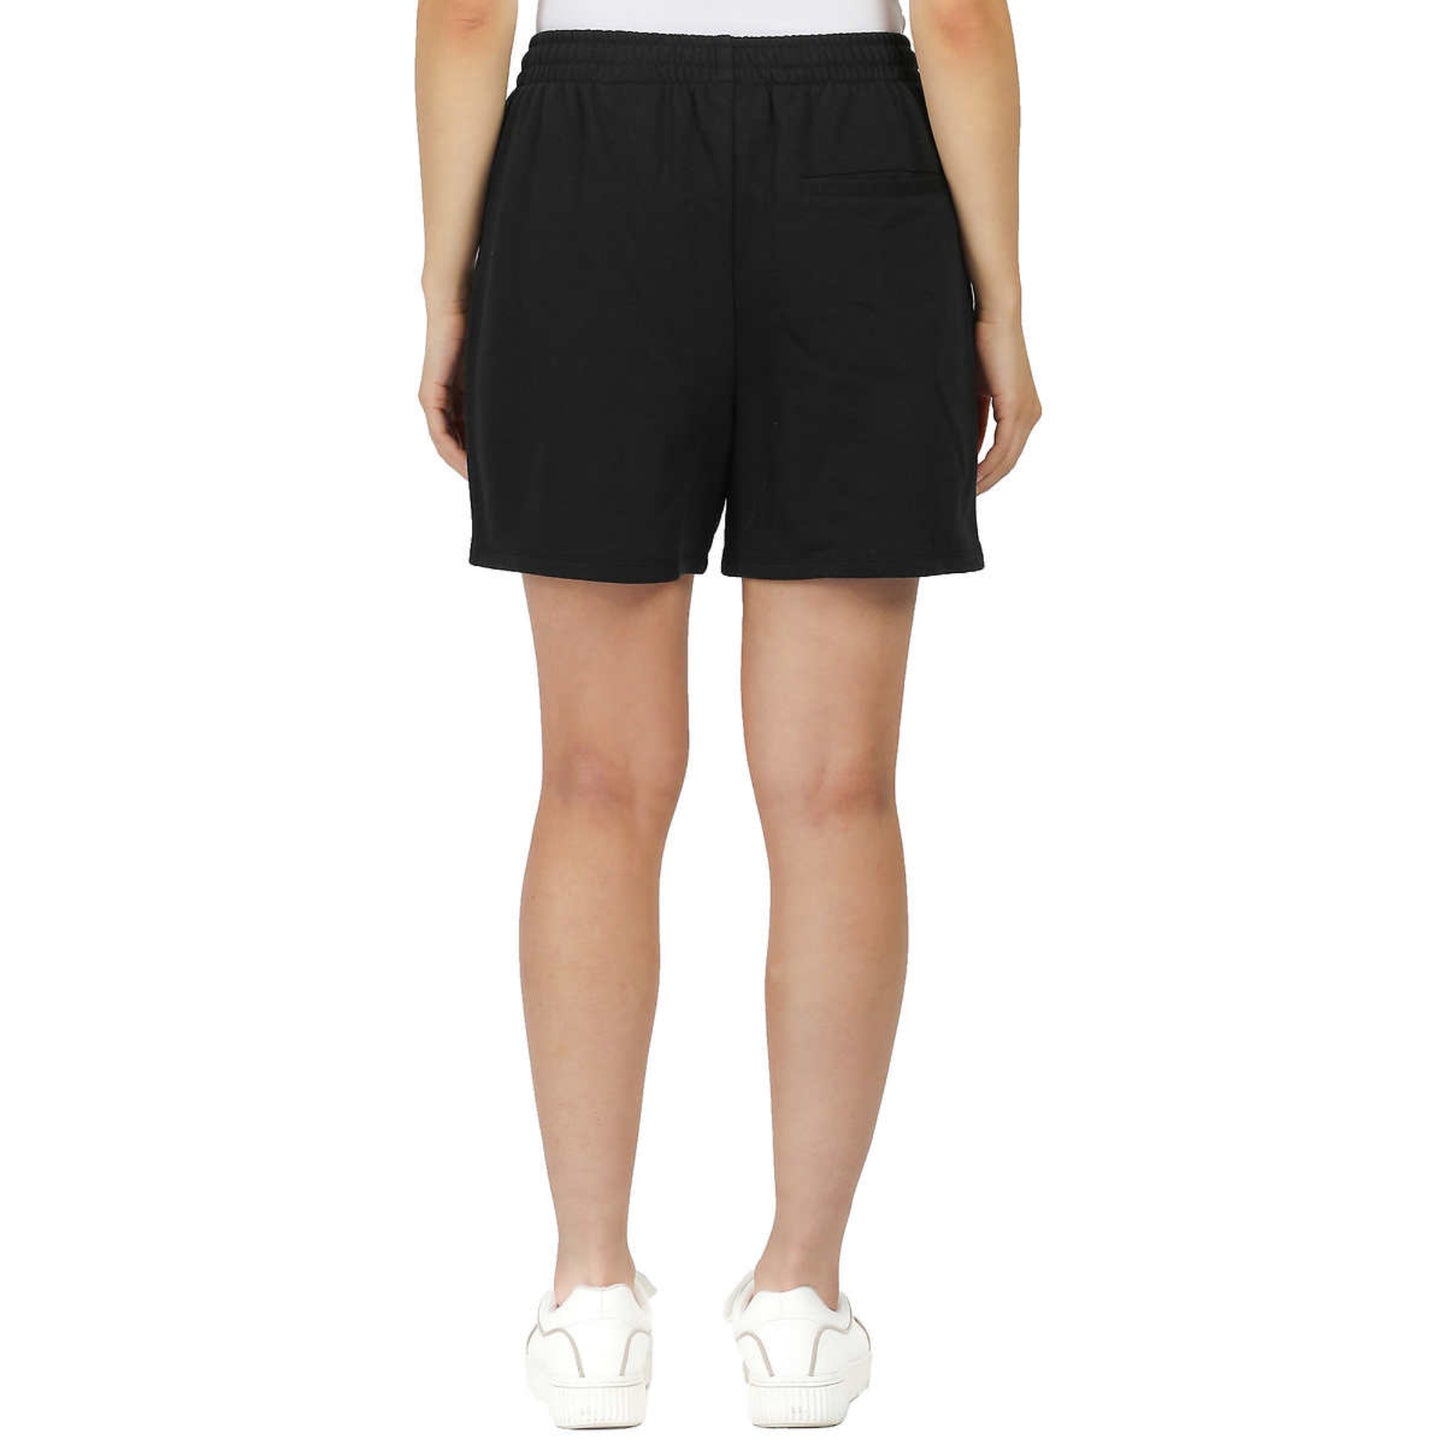 LazyPants Women's High Rise Soft Cotton Blend French Terry Shorts